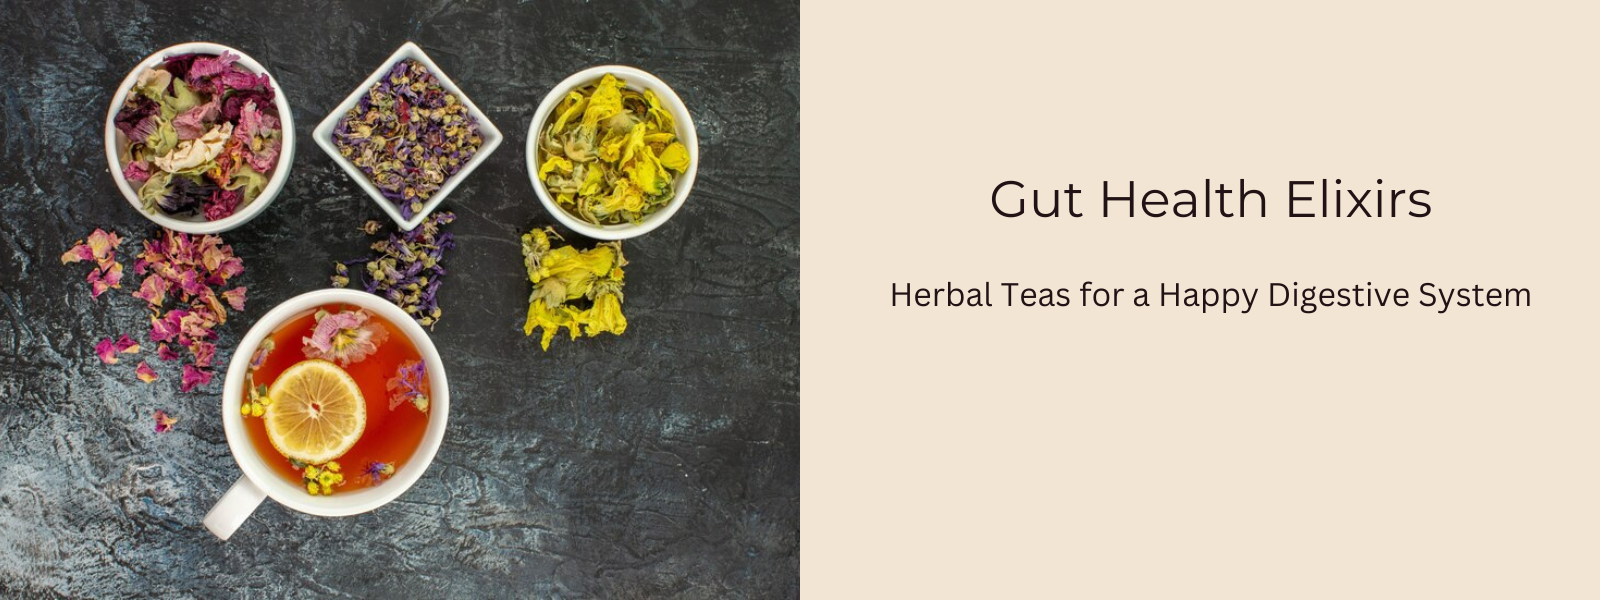 Gut Health Elixirs: Herbal Teas for a Happy Digestive System